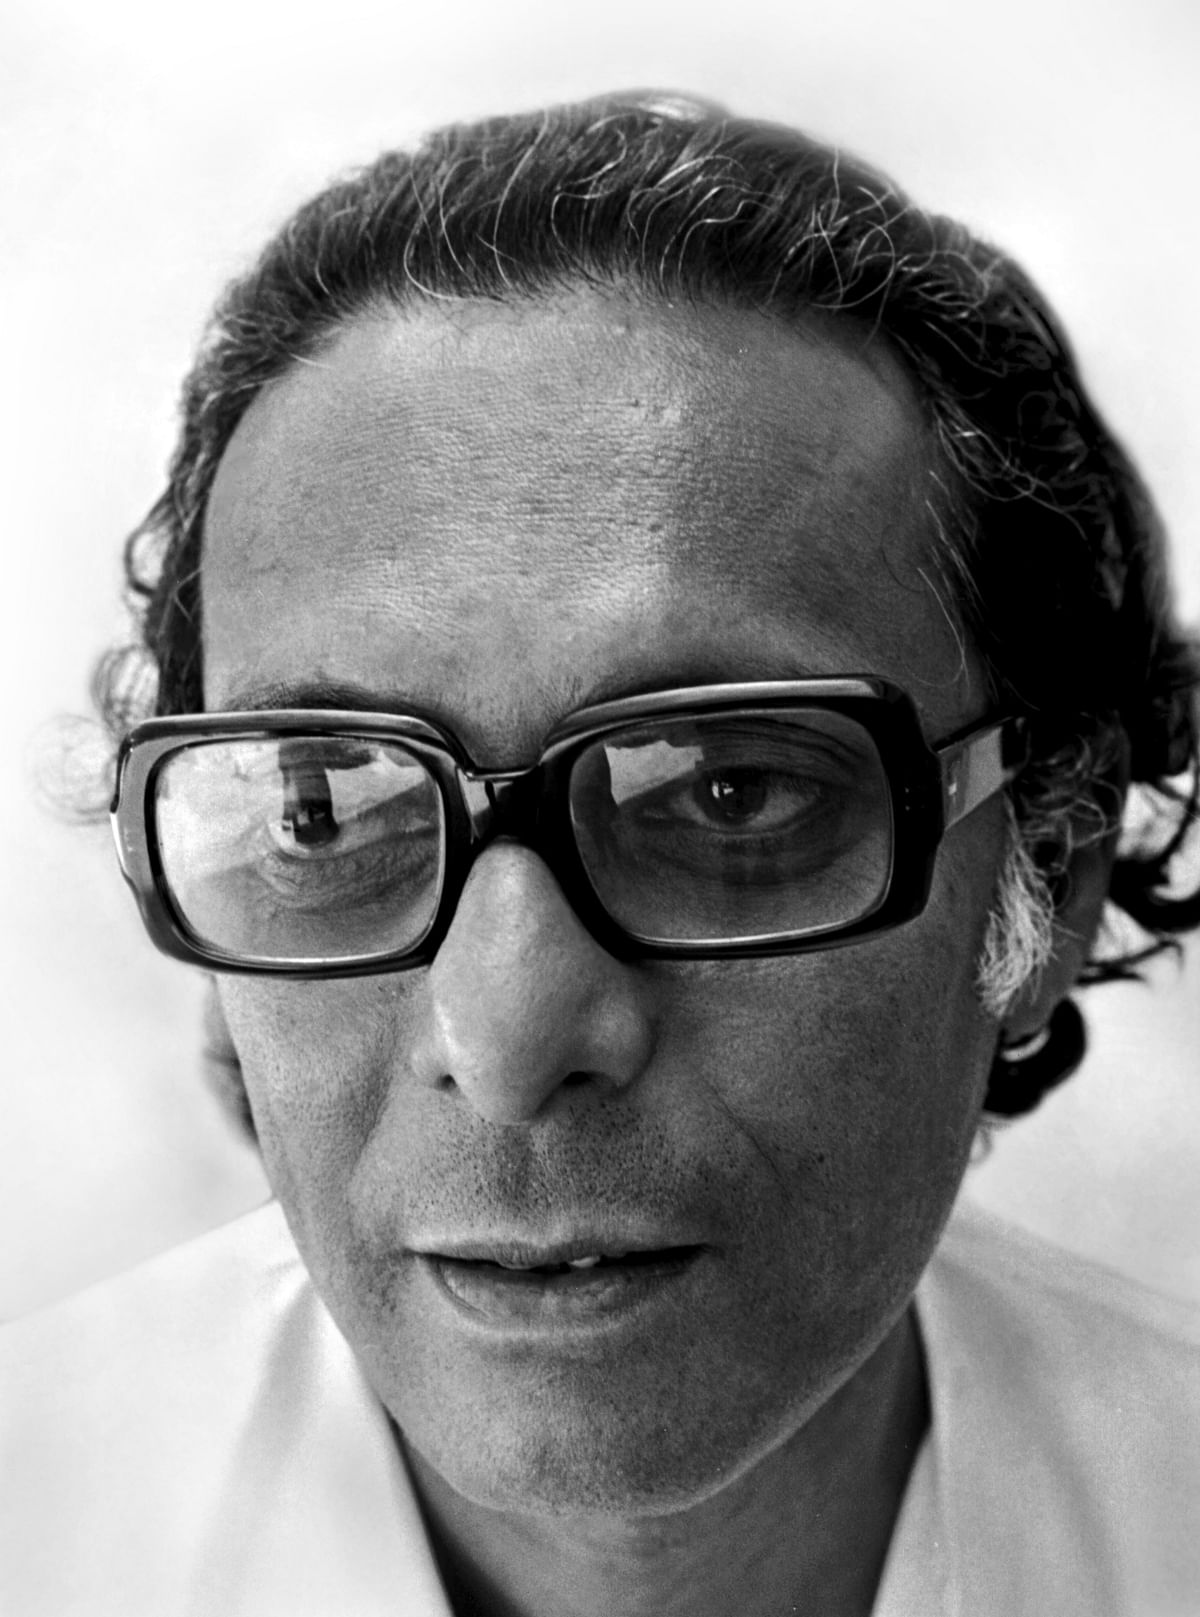 For auteur Mrinal Sen, Indian cinema was mostly rubbish